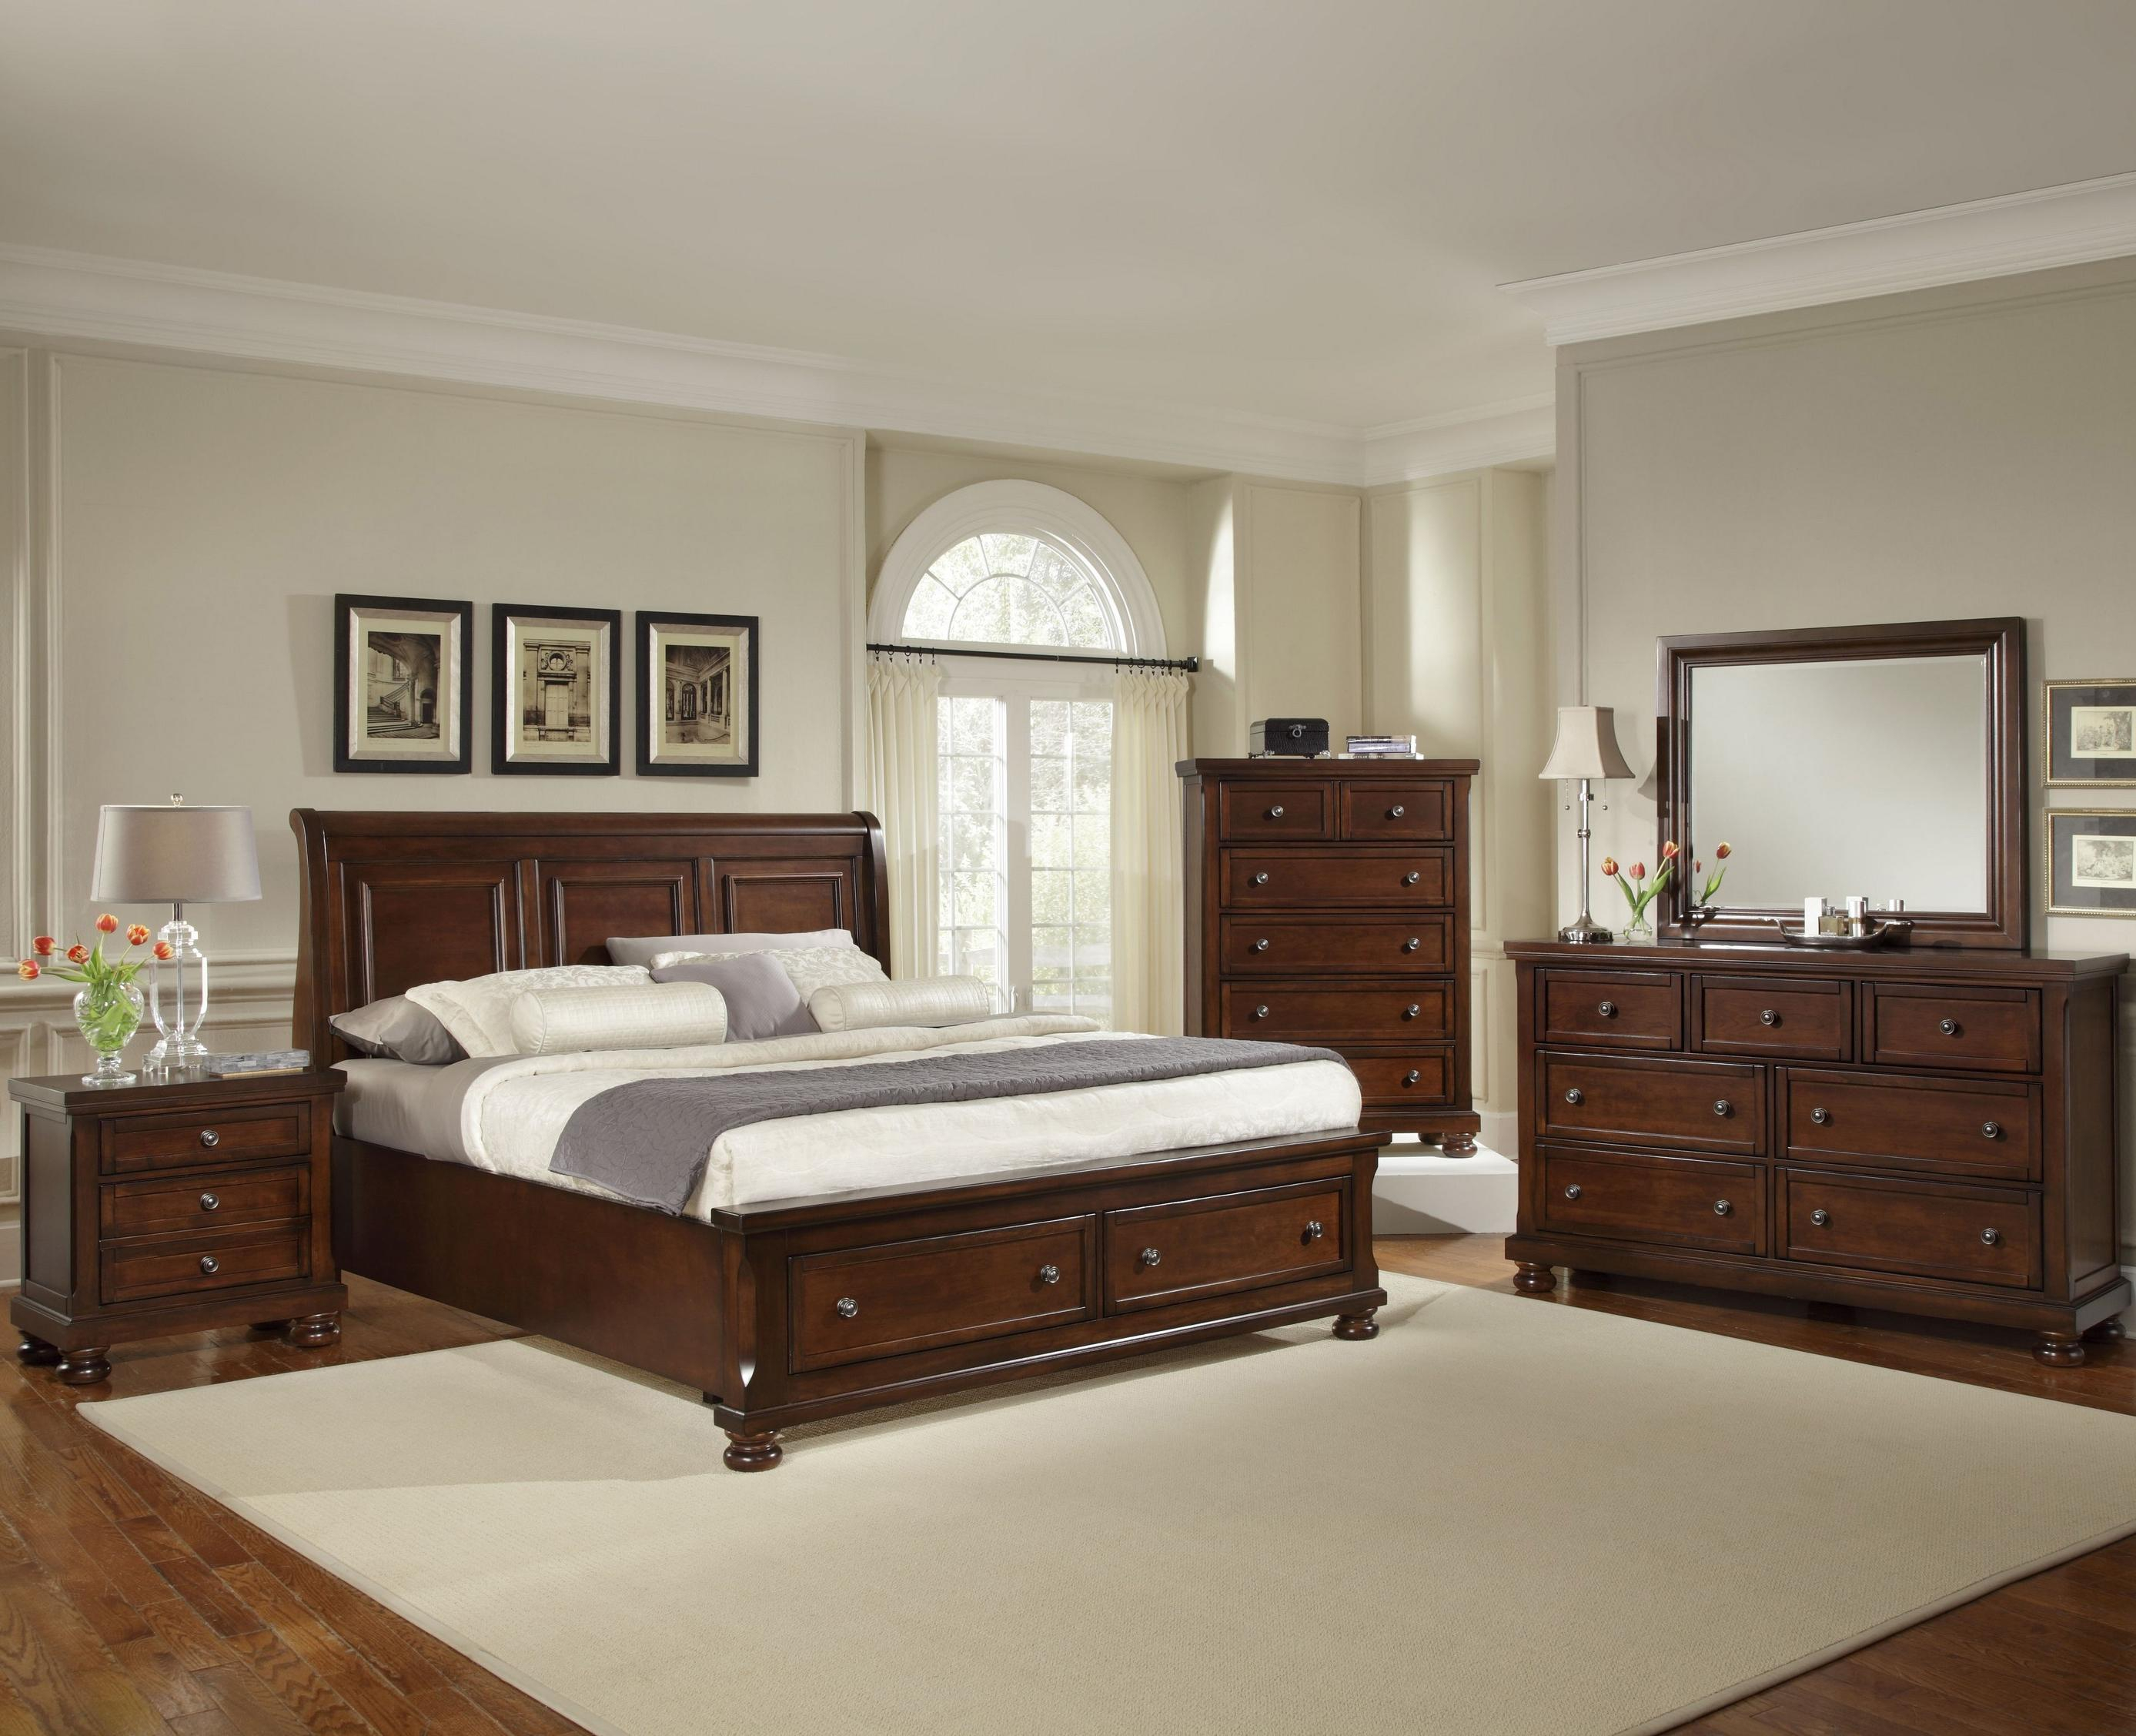 Reflections Queen Bedroom Group Vaughan Bassett At Belfort Furniture throughout dimensions 2775 X 2255